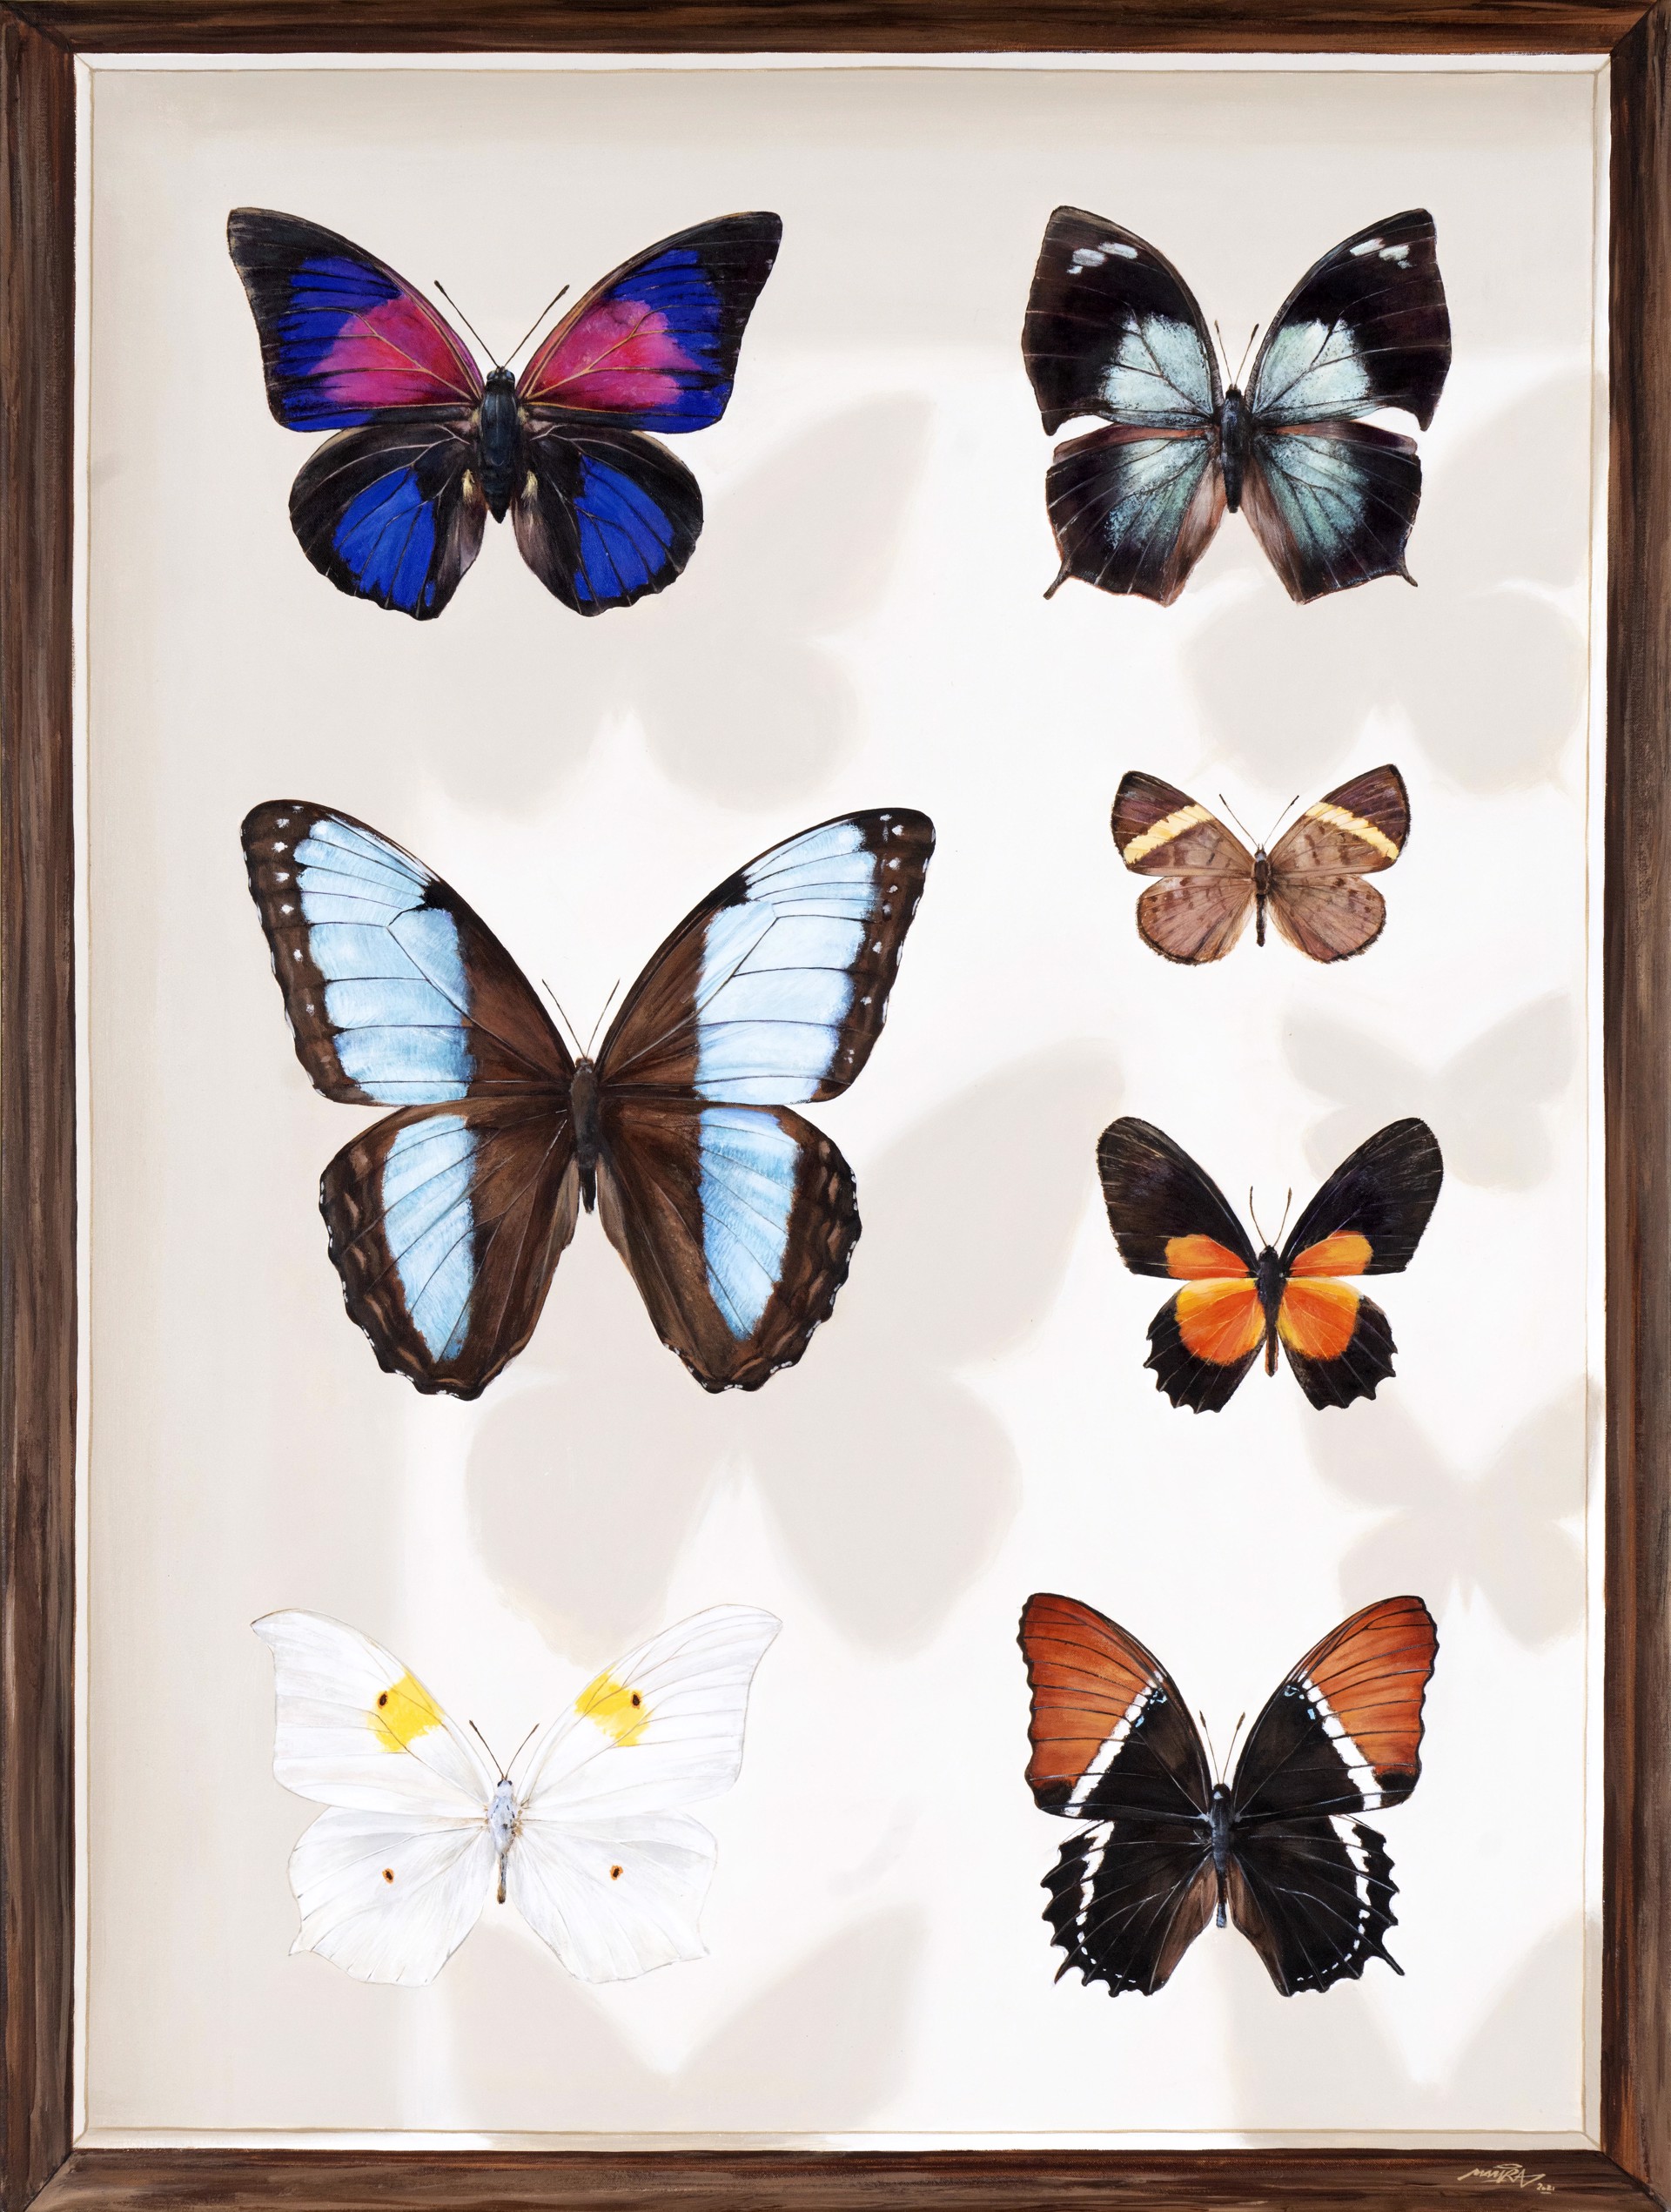 Butterflies of Mexico - Board 2 by Youri Cansell aka Mantra